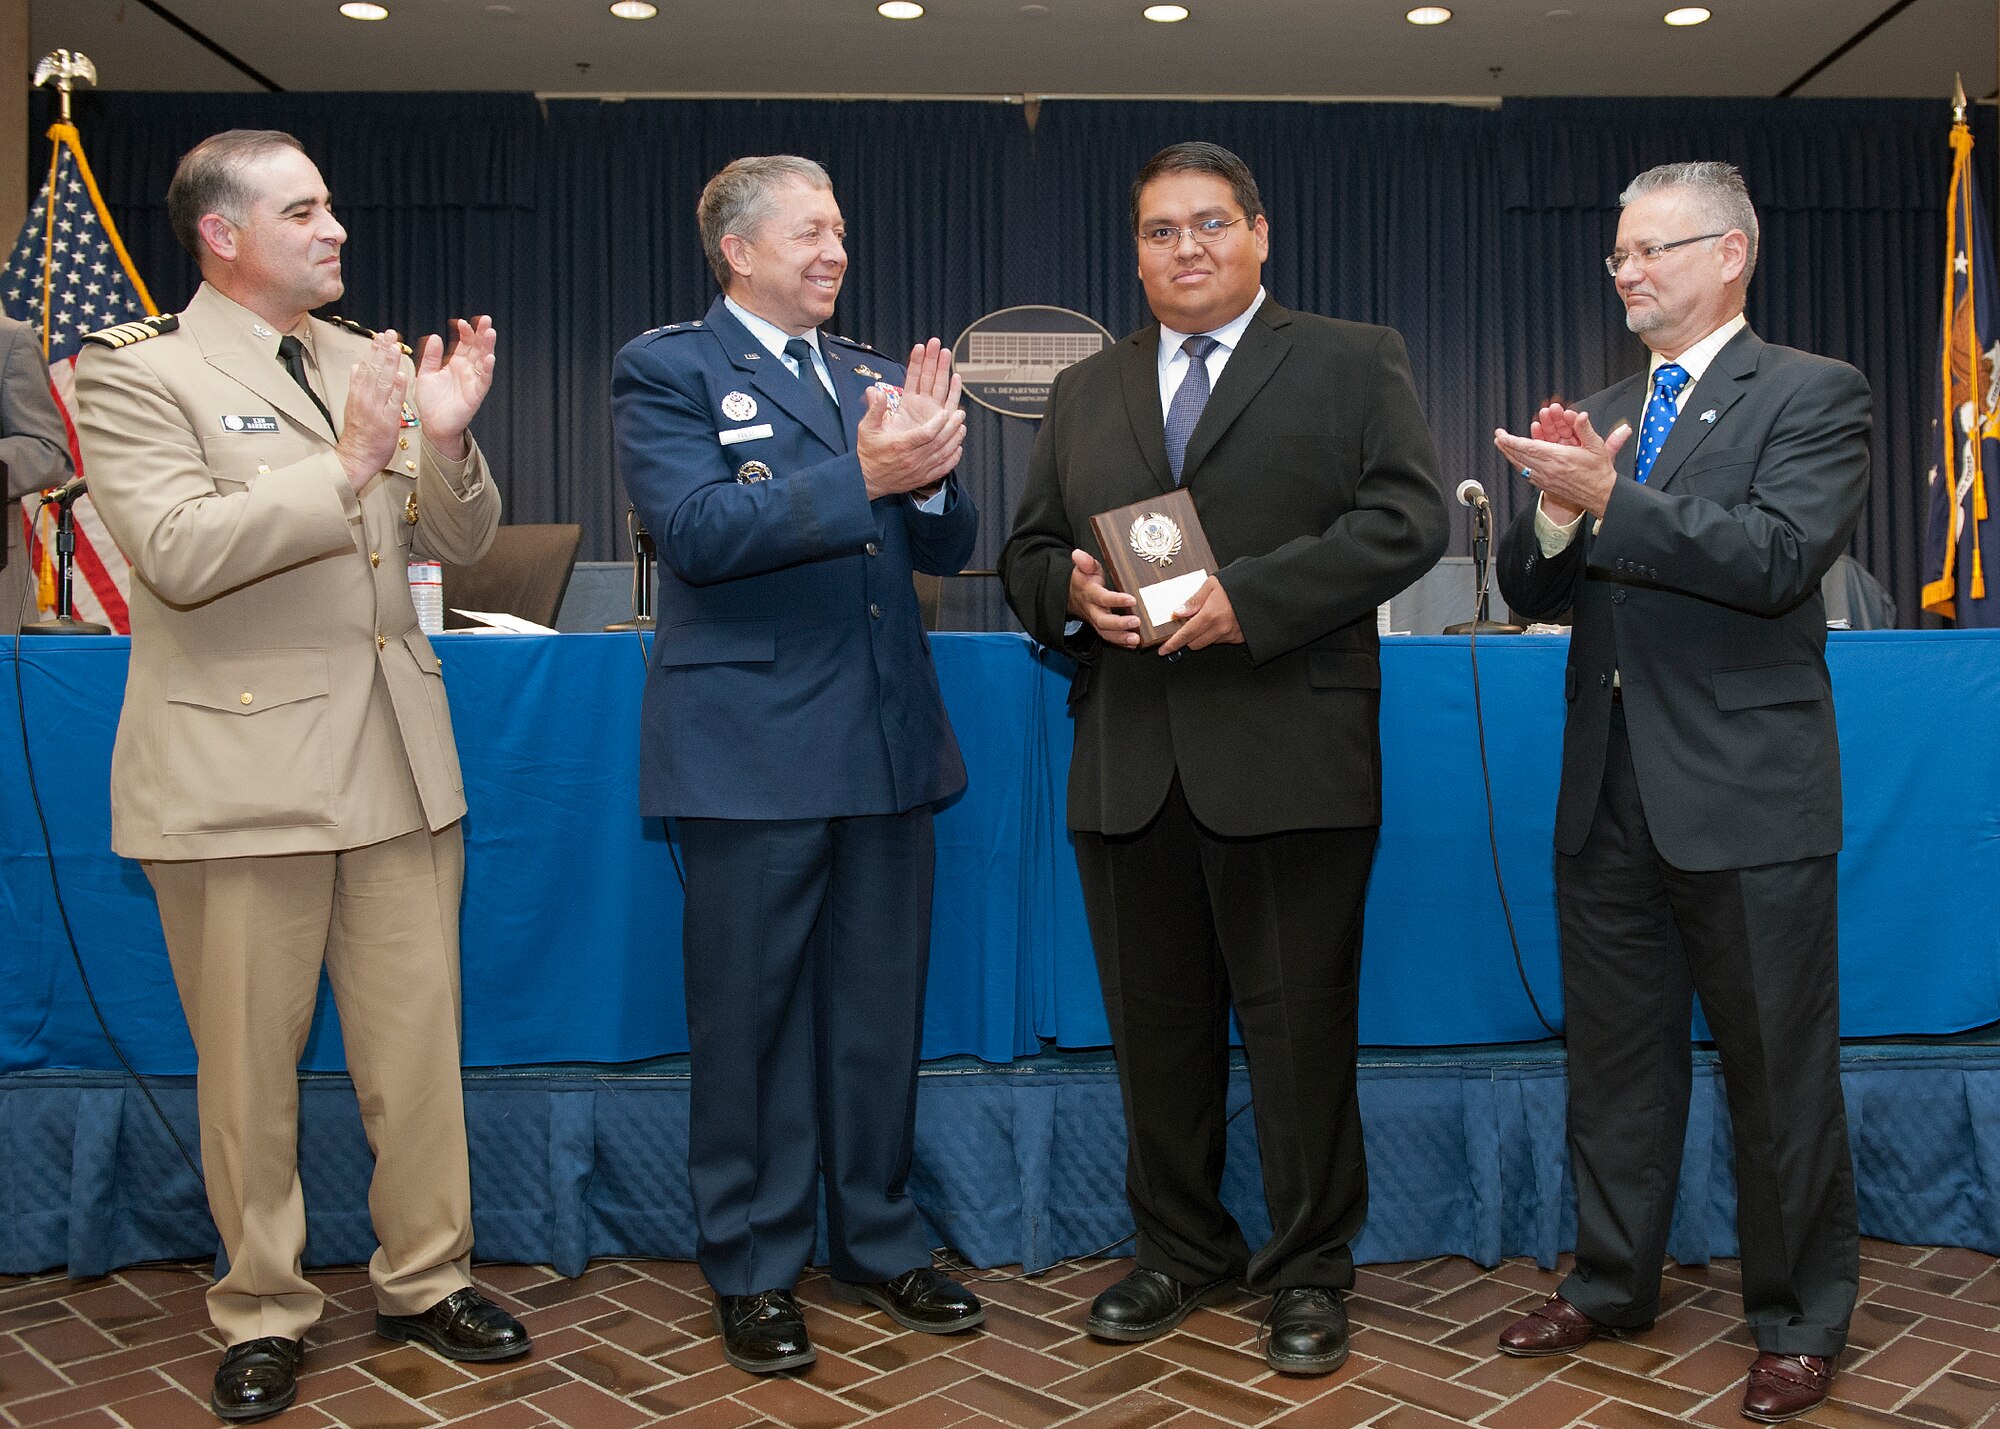 Flanked by Navy Capt. Kenneth Barrett (left) and Gene Sexton (right), Maj. Gen. Gregory Feest, the Air Force chief of safety and commander of the Air Force Safety Center at Kirtland Air Force Base, N.M., congratulates Michael Nakai for being one of five recipients of the 2011 Judith C. Gilliom Outstanding Workforce Recruitment Program for College Students with Disabilities Award during a ceremony Aug. 5, 2011, at the Department of Labor headquarters in Washington, D.C.  Nakai is an information technology specialist at the safety center. Barrett is the deputy director of the office of diversity management and equal opportunity for DOD.  Sexton is the director of the human resources center for the DOL.  (U.S. Air Force photo/Jim Varhegyi)